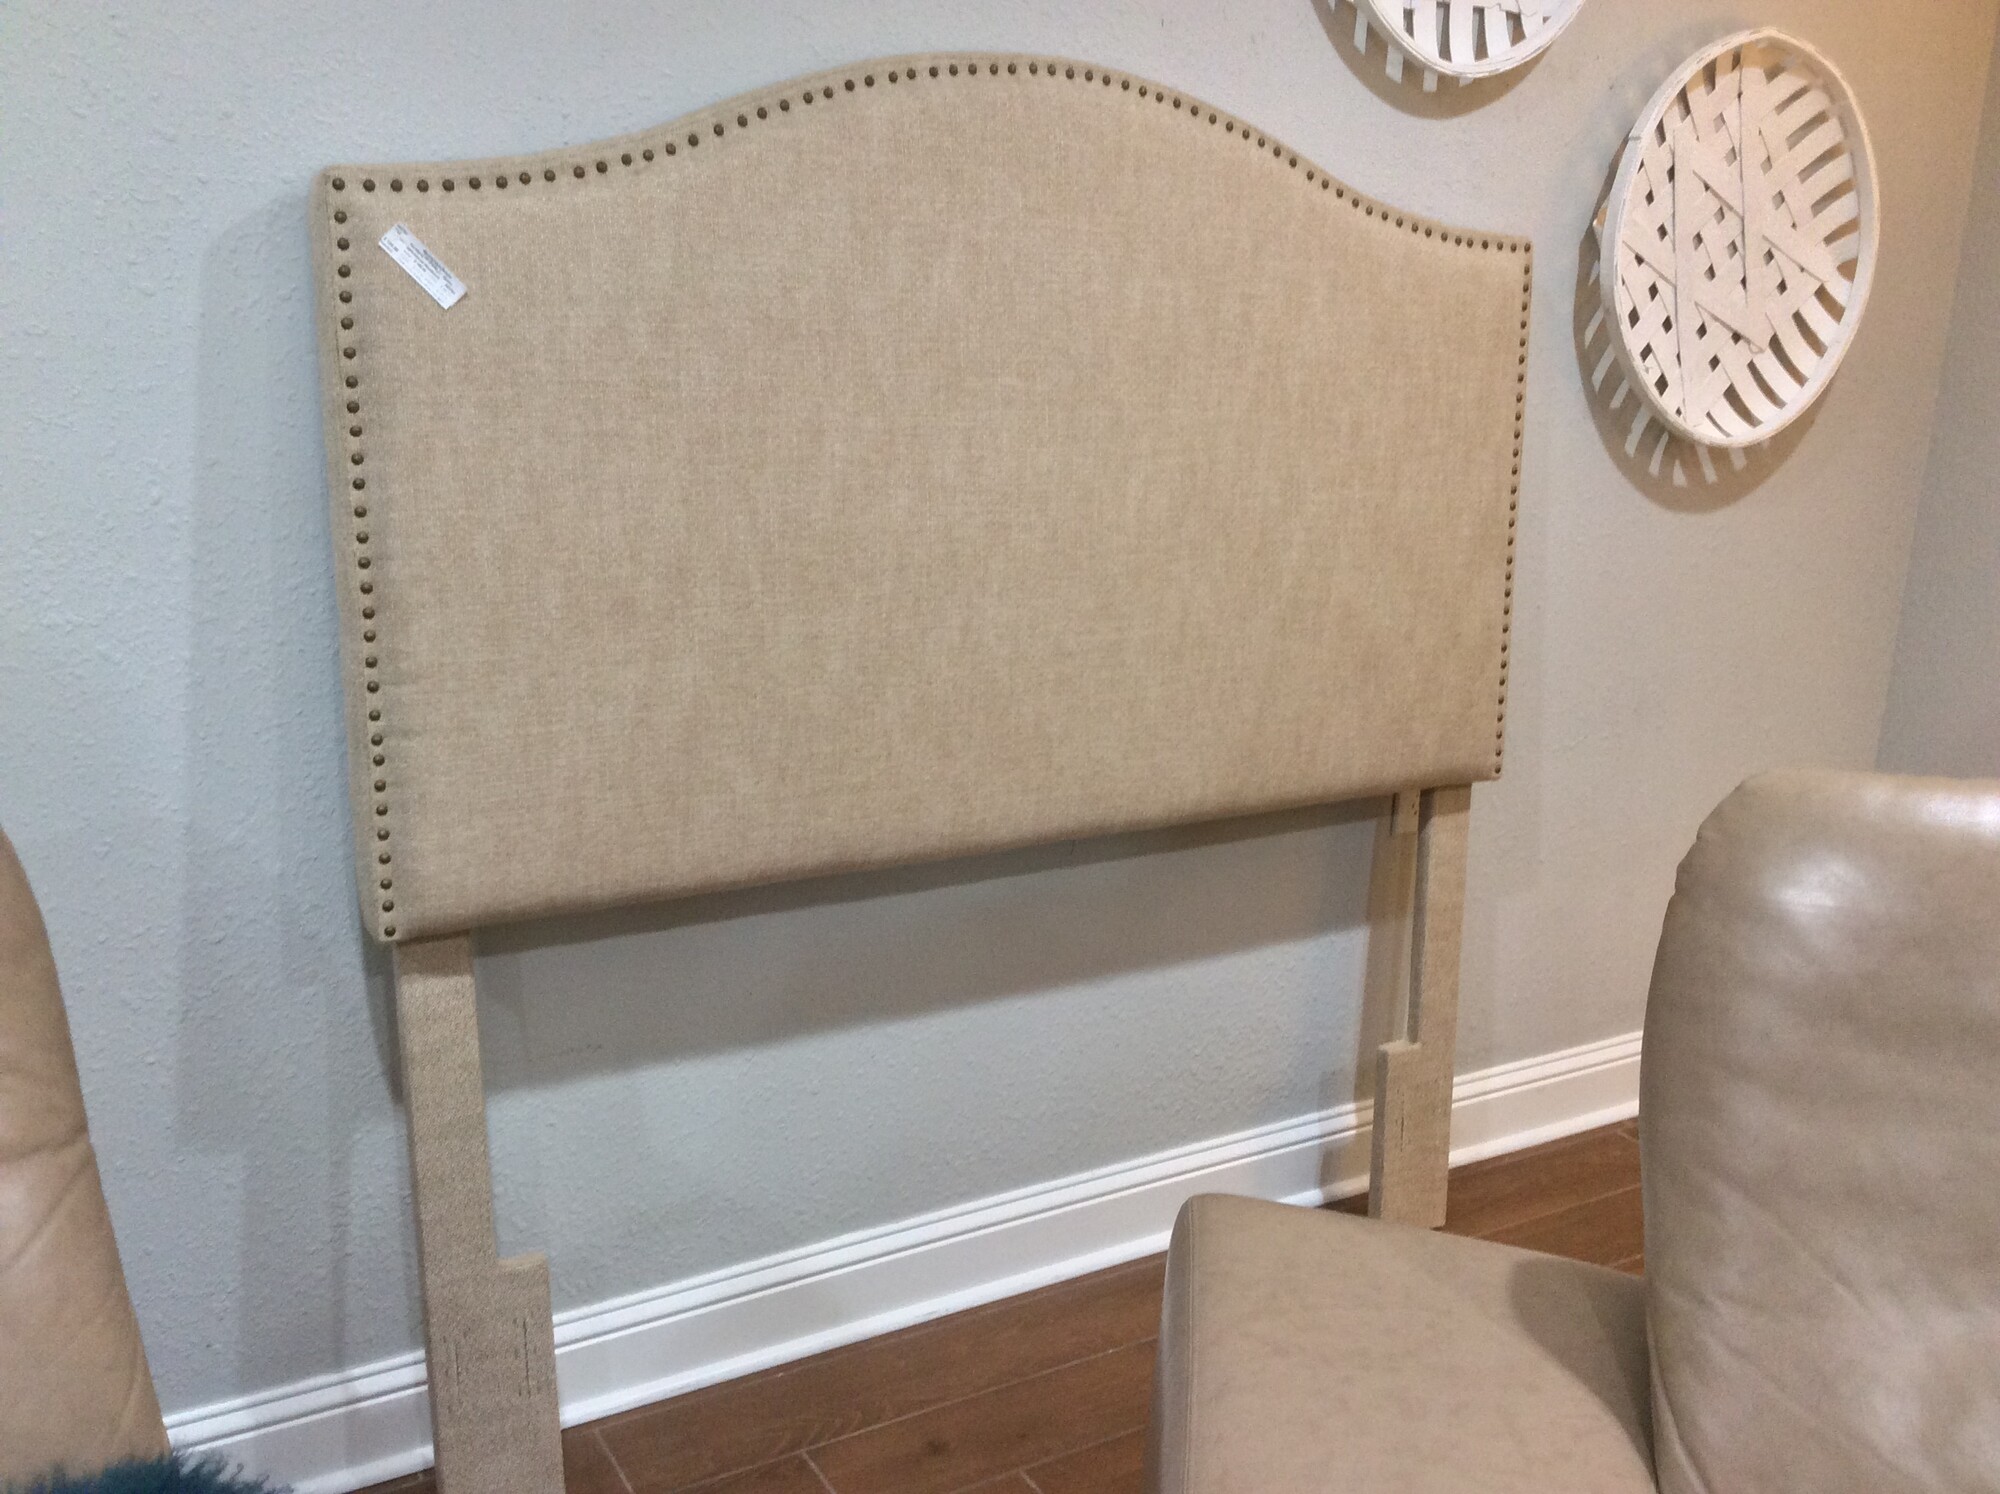 This is a Home Meridian Tan Upholstered Queen Headboard. This headboard has rustic nailhead trim.